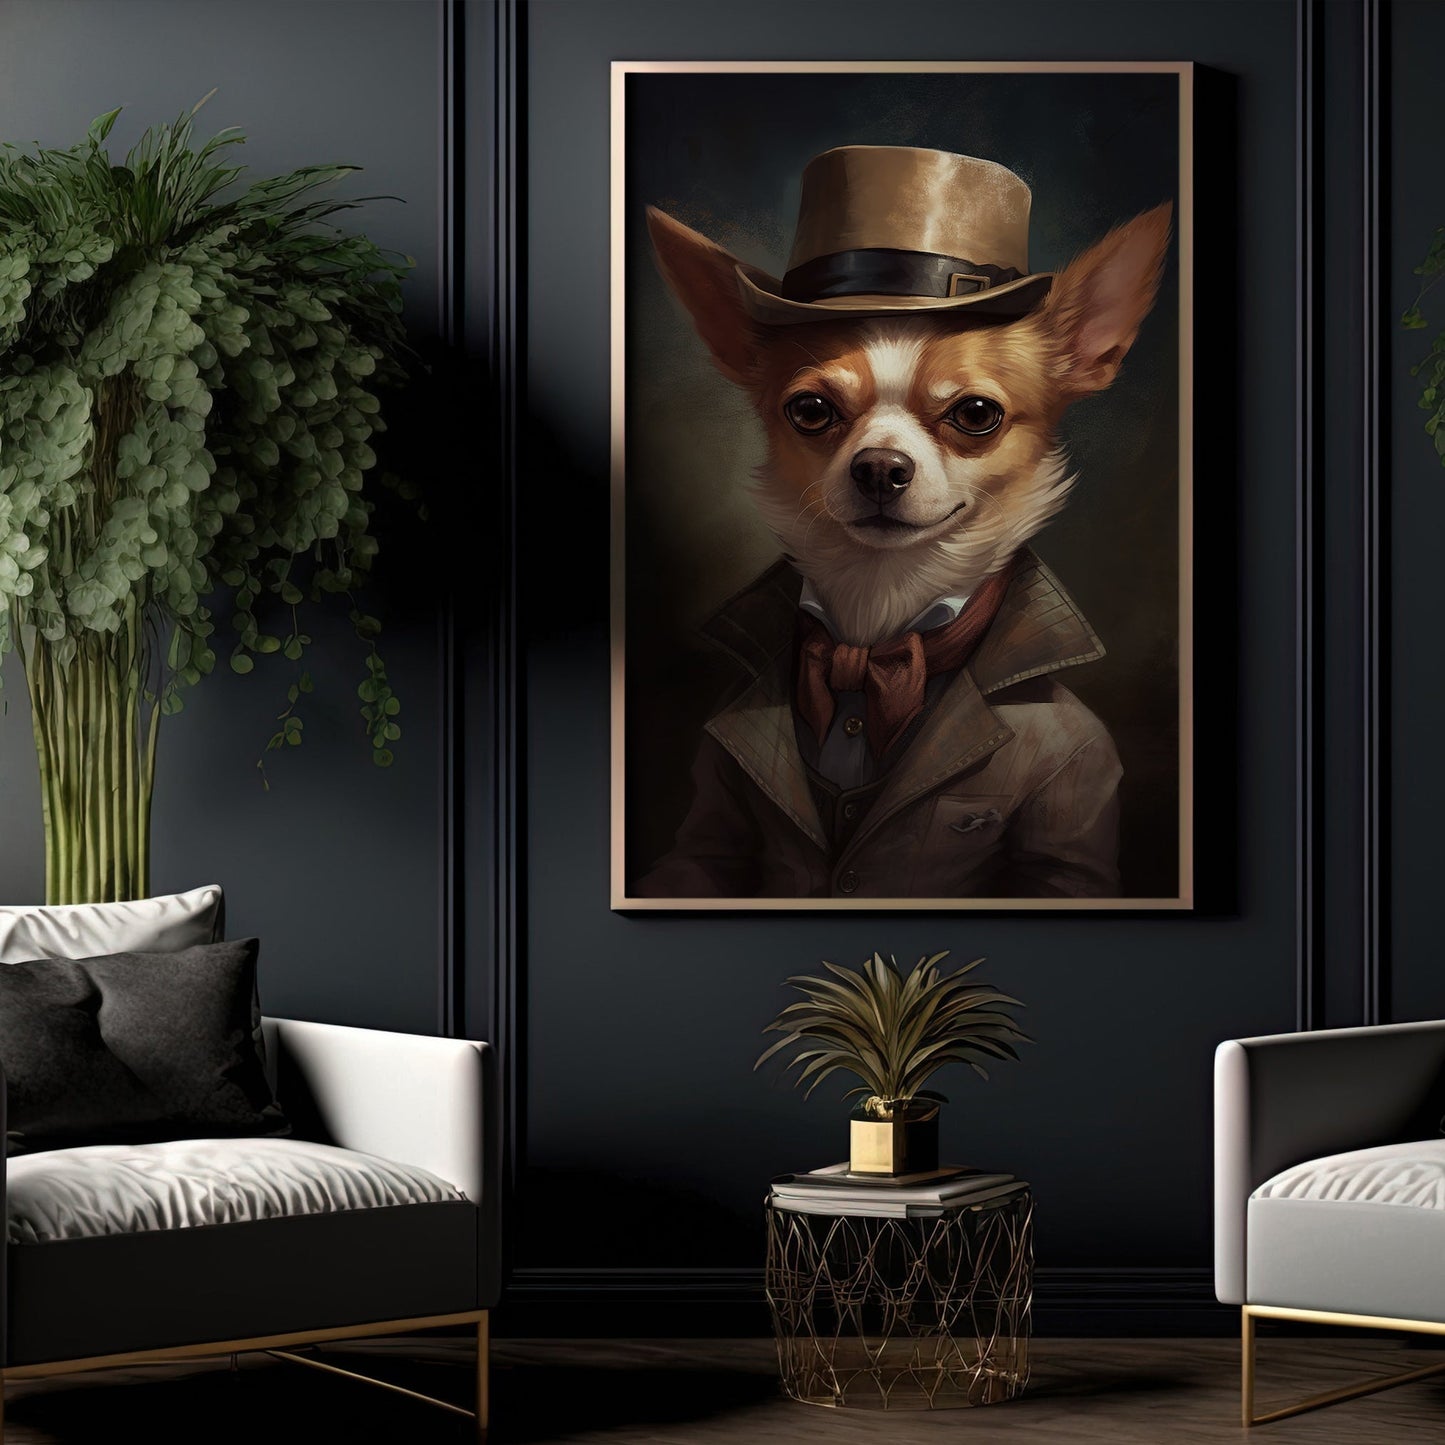 Chihuahua In Victorian Suit Style, Victorian Dog Canvas Painting, Victorian Animal Wall Art Decor, Poster Gift For Chihuahua Dog Lovers